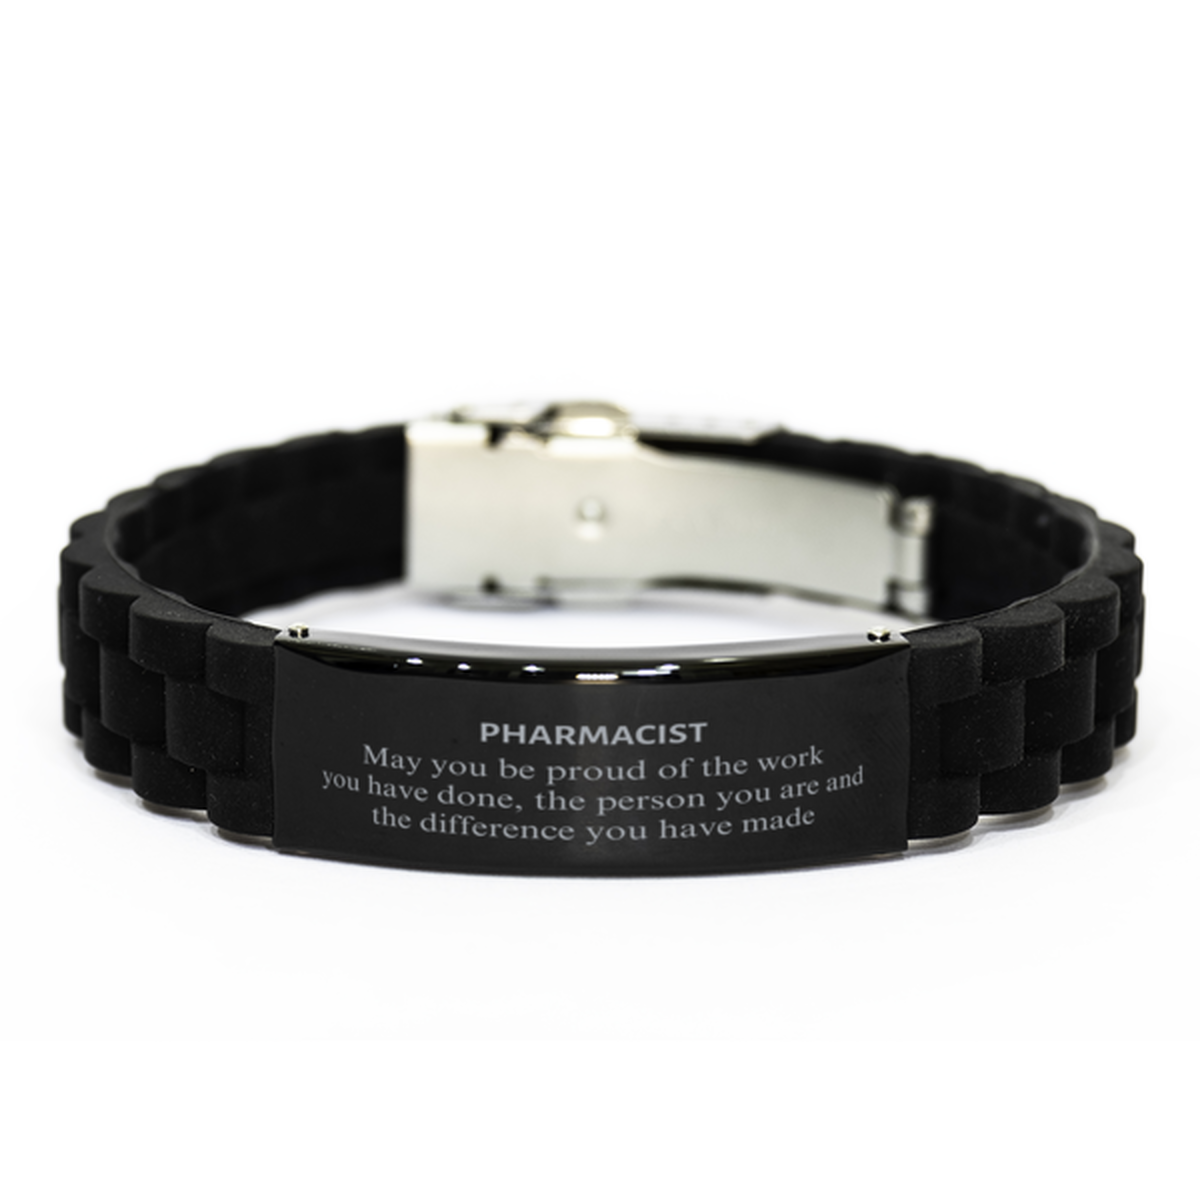 Pharmacist May you be proud of the work you have done, Retirement Pharmacist Black Glidelock Clasp Bracelet for Colleague Appreciation Gifts Amazing for Pharmacist